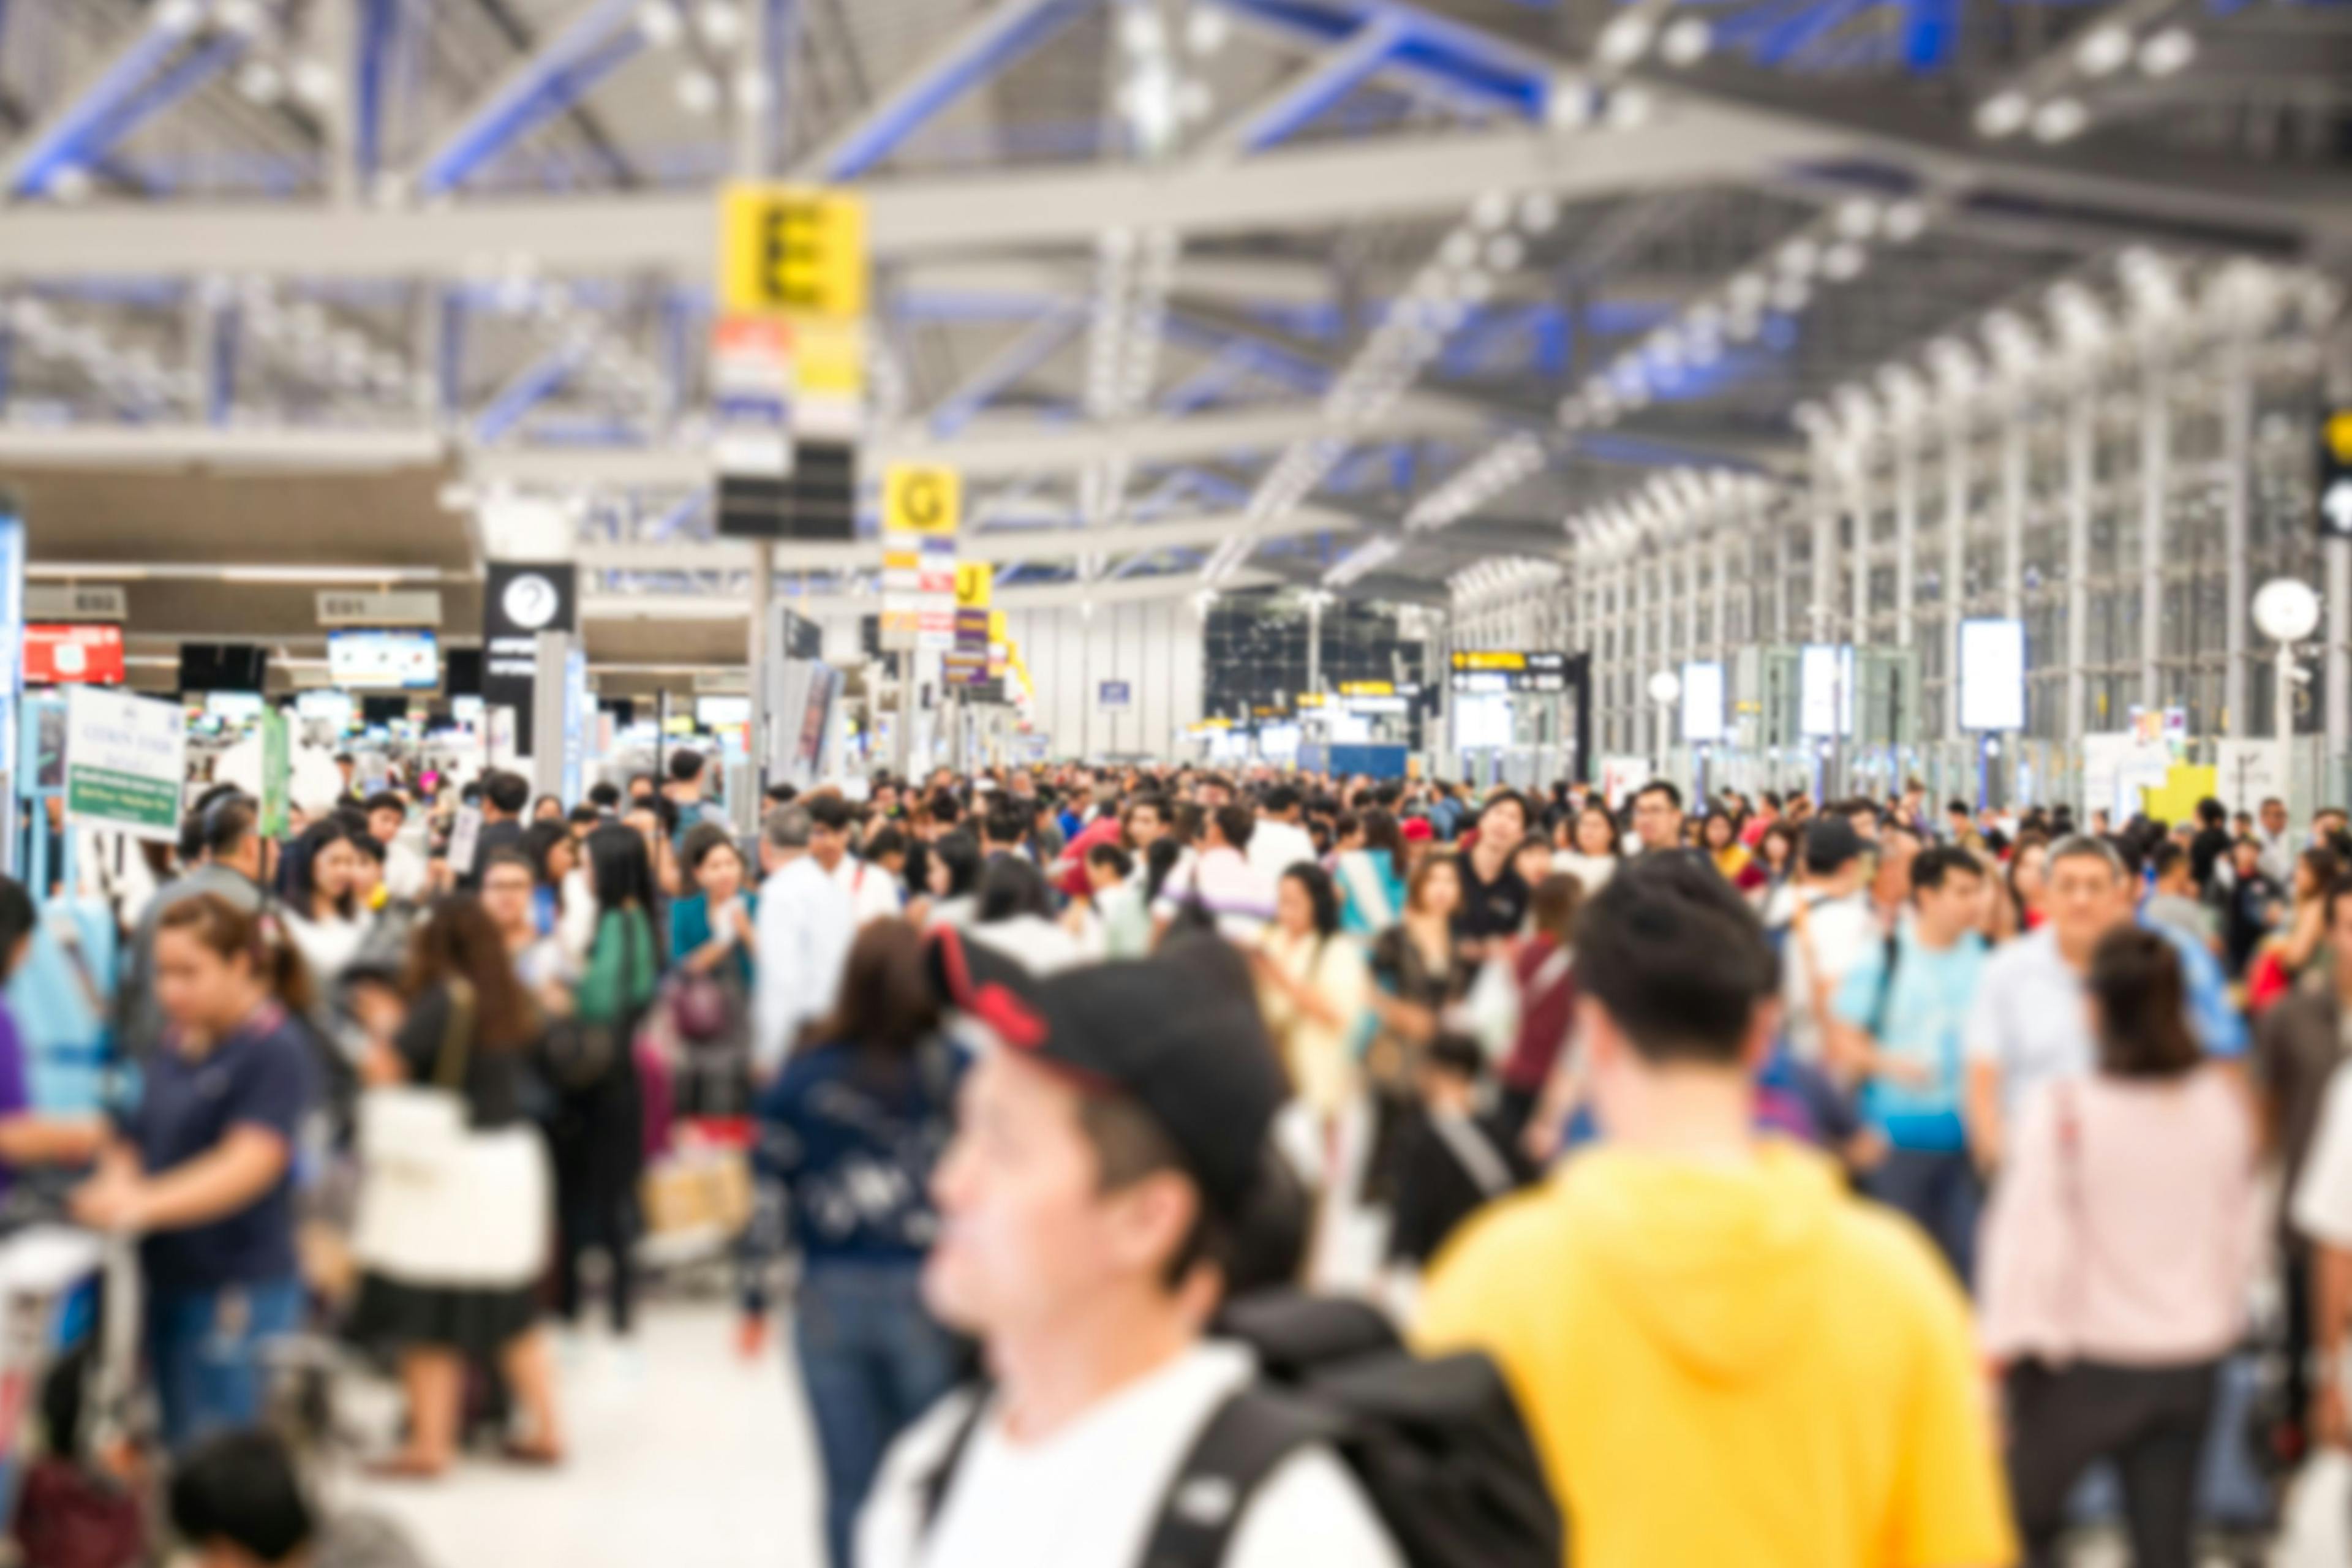 Blurred many passengers people of crowd anonymous walking at the airport. scene of airport with passengers activity. Terminal Departure Check-in at airport. Travel International and business concept. | Image Credit: © setthawuth - stock.adobe.com